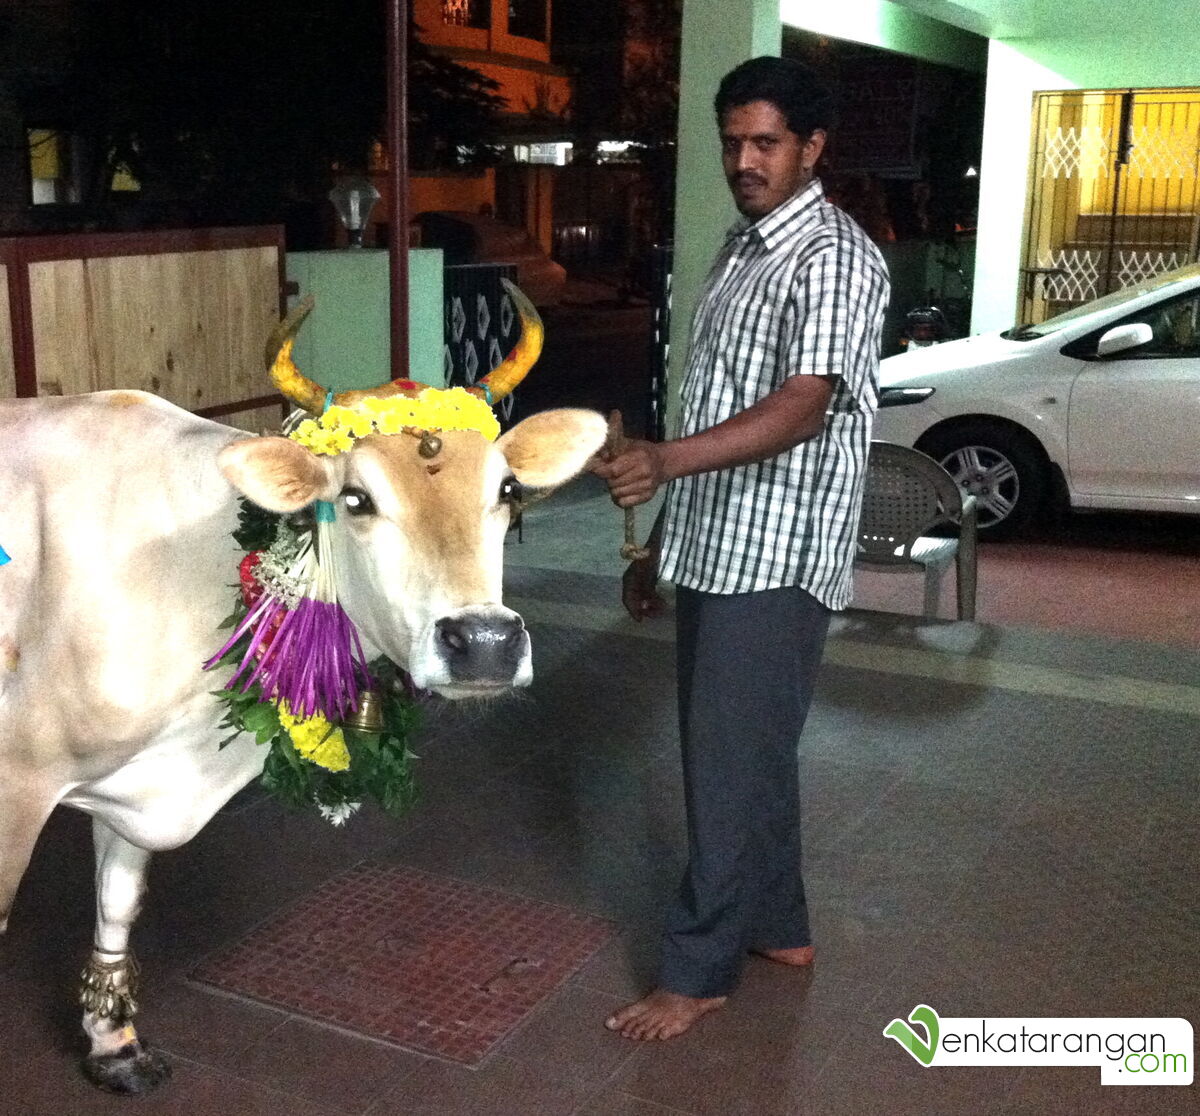 Visit of cow to our house in 2012 (2012யில் வீட்டிற்கே வந்து வாழ்த்தும் பசு மாடு)